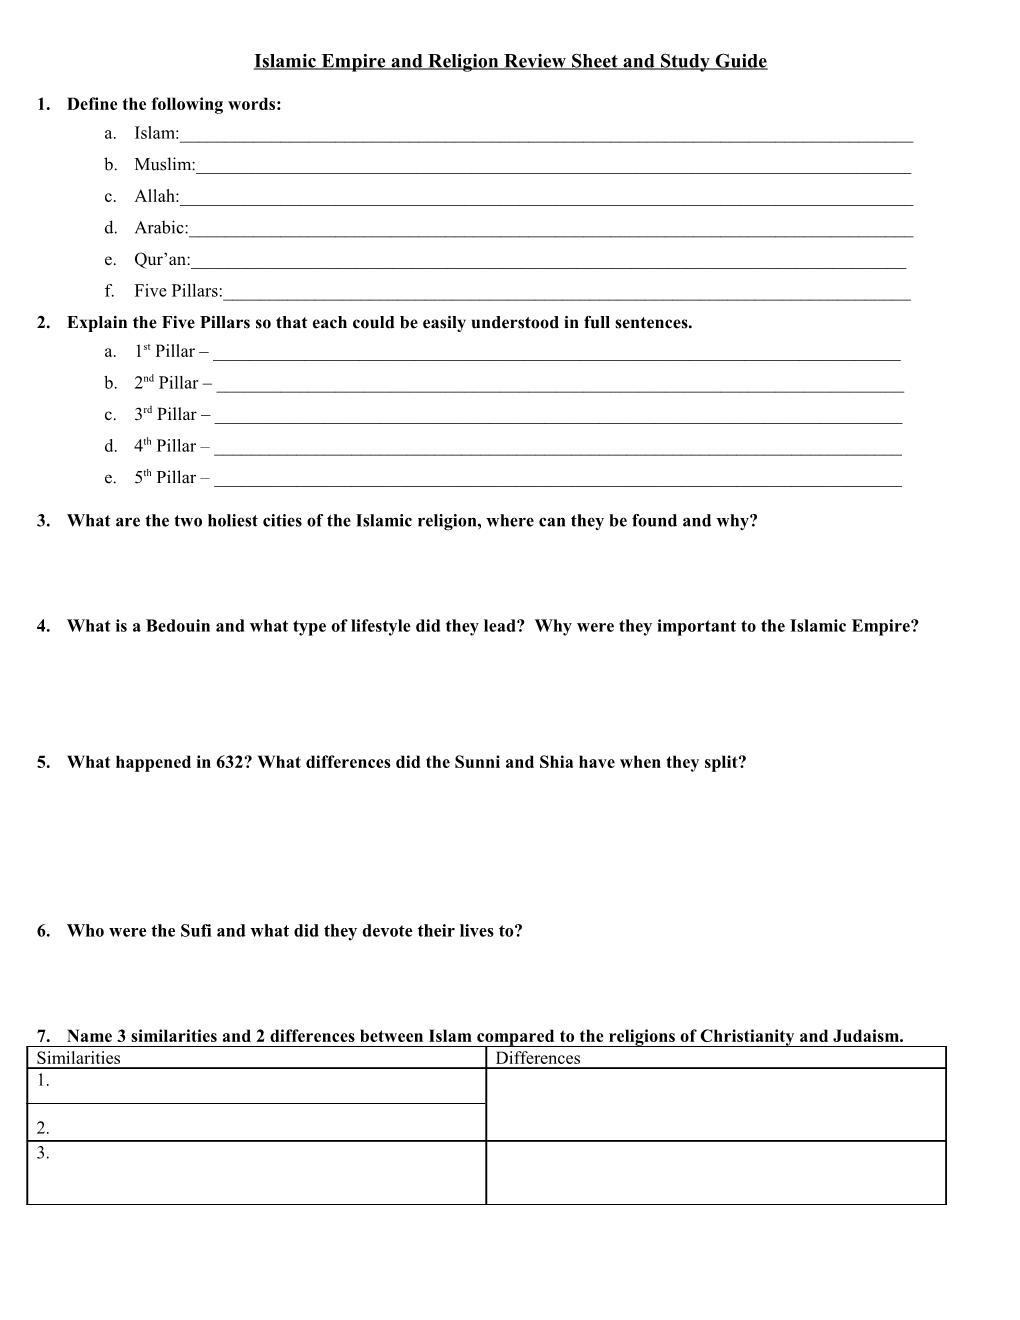 Islamic Empire and Religion Review Sheet and Study Guide